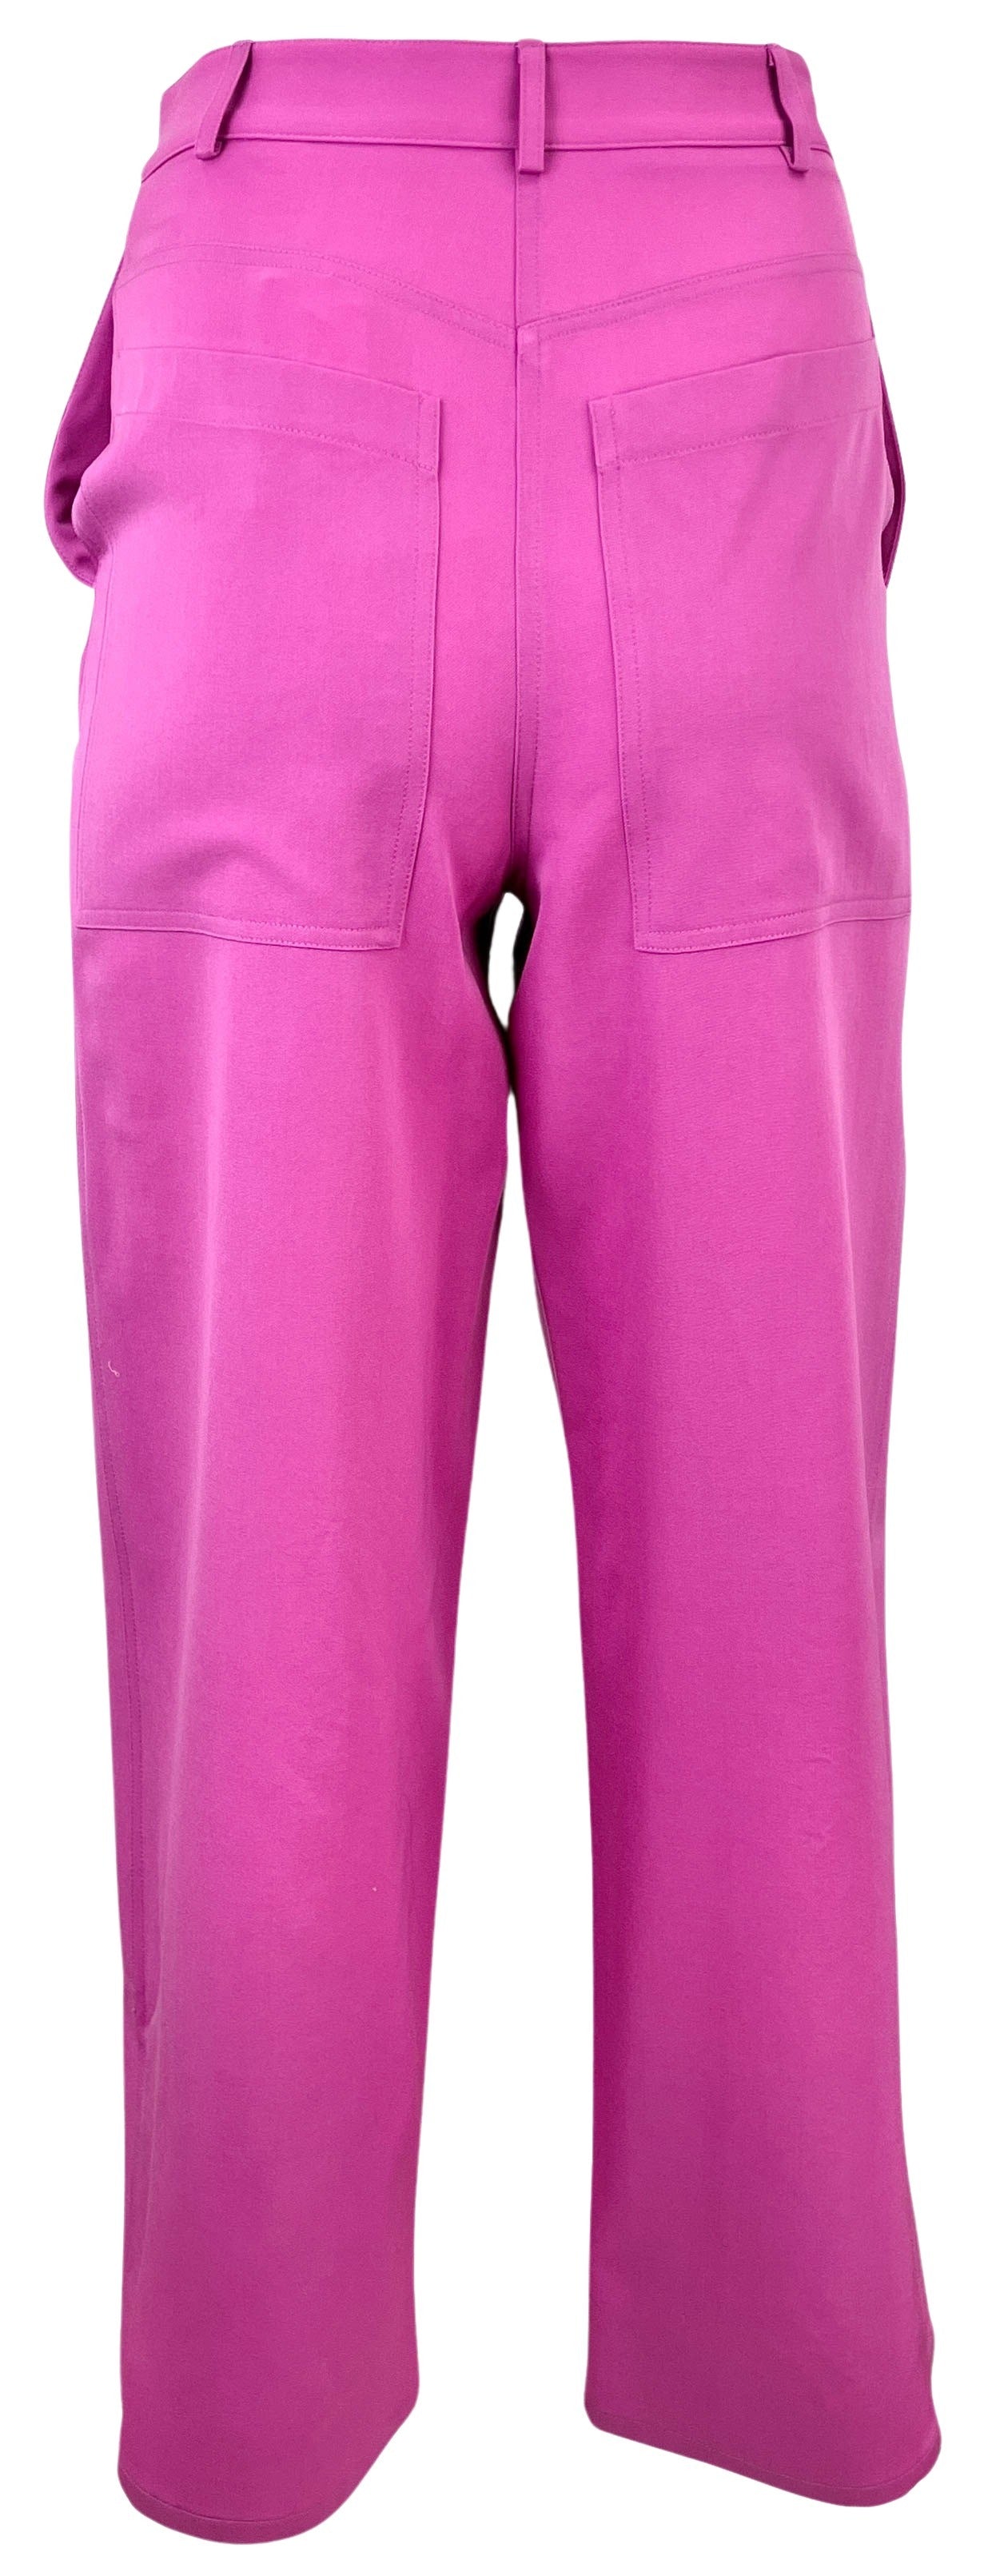 LAPOINTE Trousers in Orchid - Discounts on LaPointe at UAL